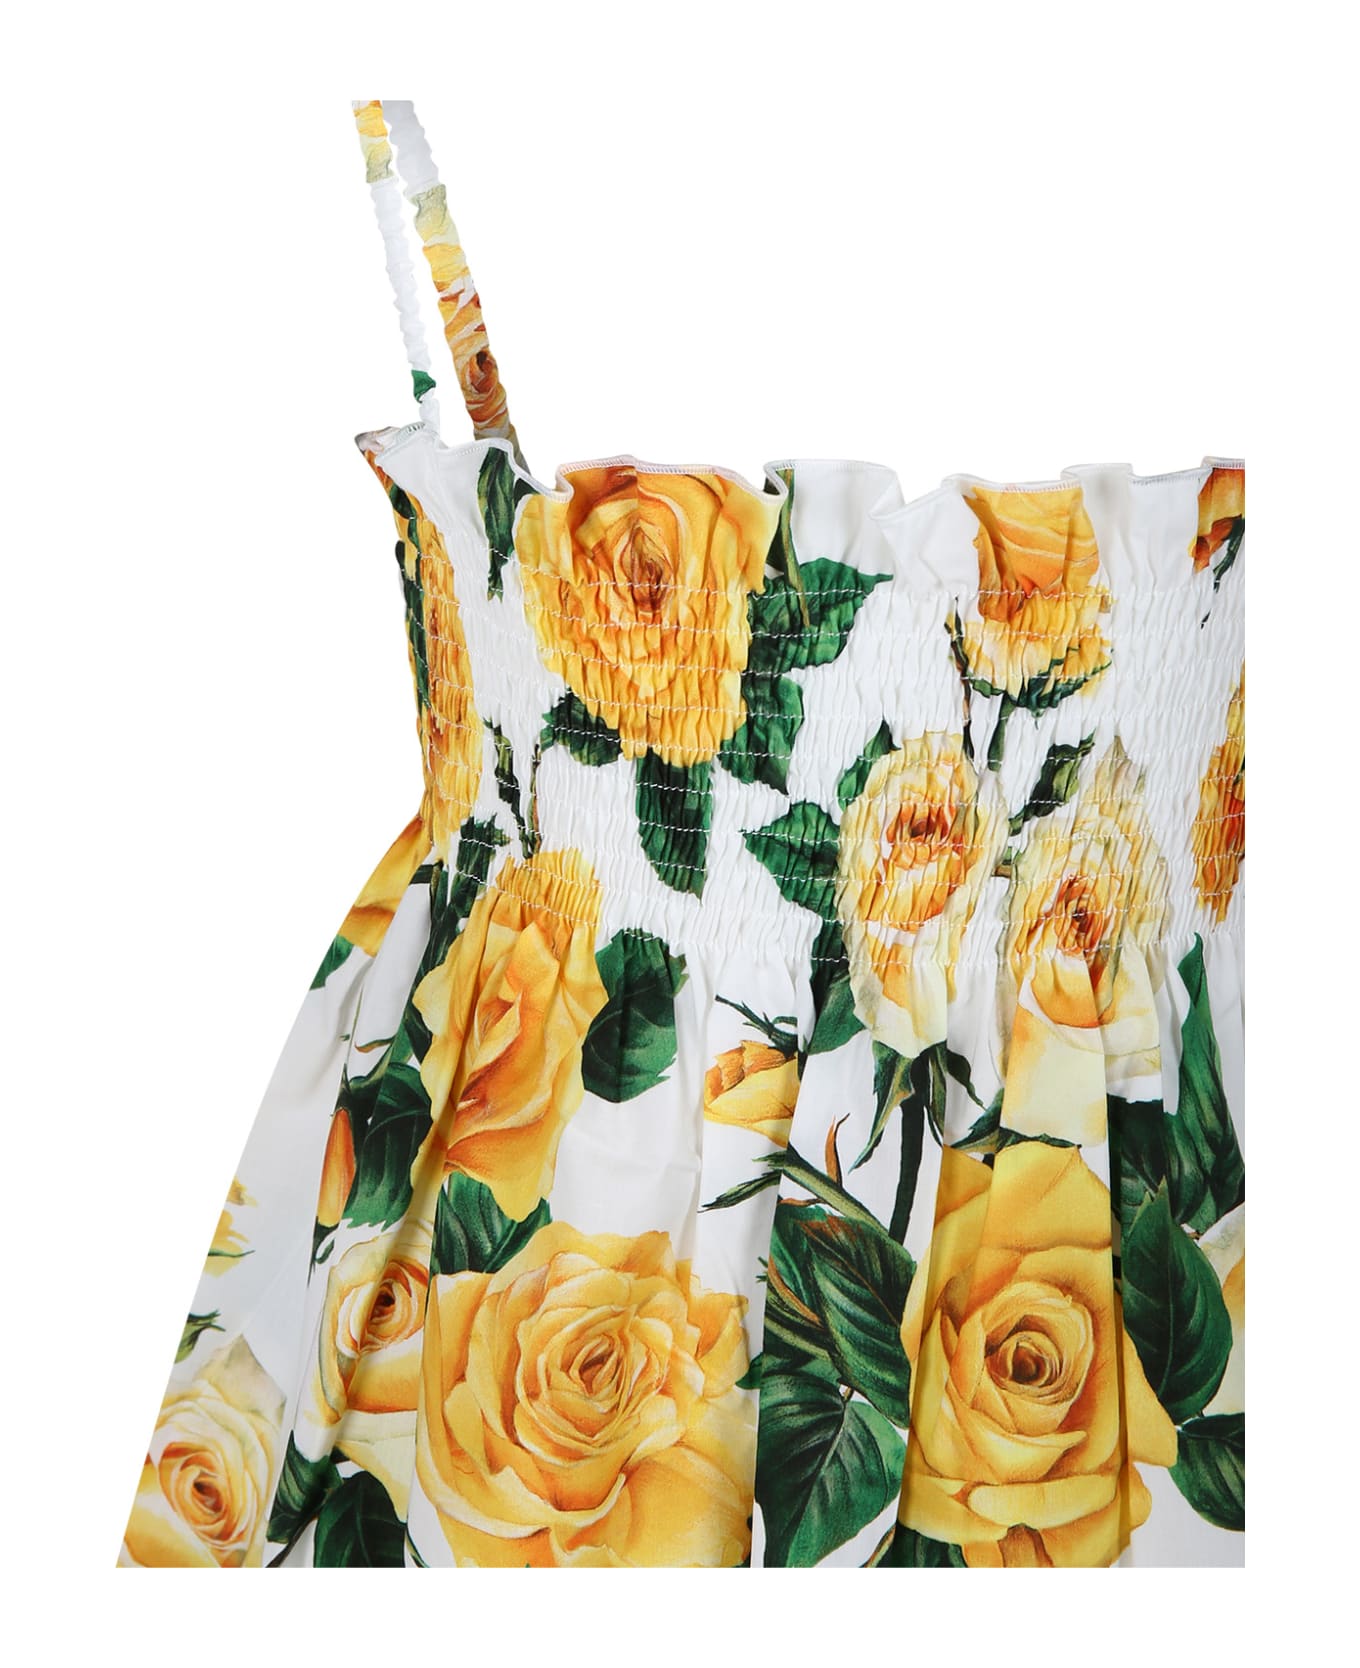 Dolce & Gabbana White Casual Dress For Girl With Flowering Pattern - Fantasia ワンピース＆ドレス